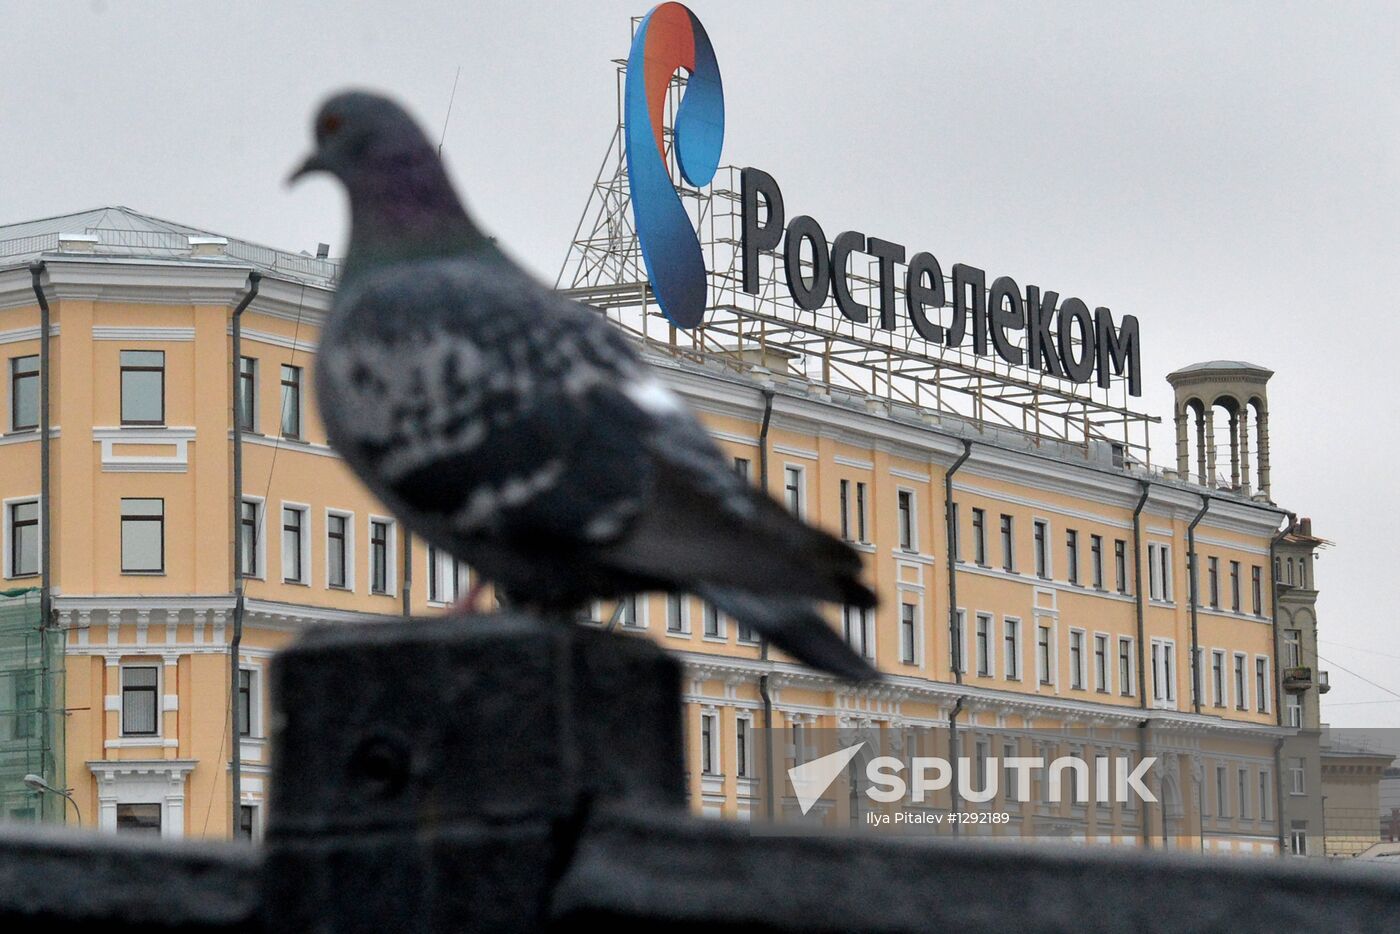 Rostelecom logo on a building in Moscow